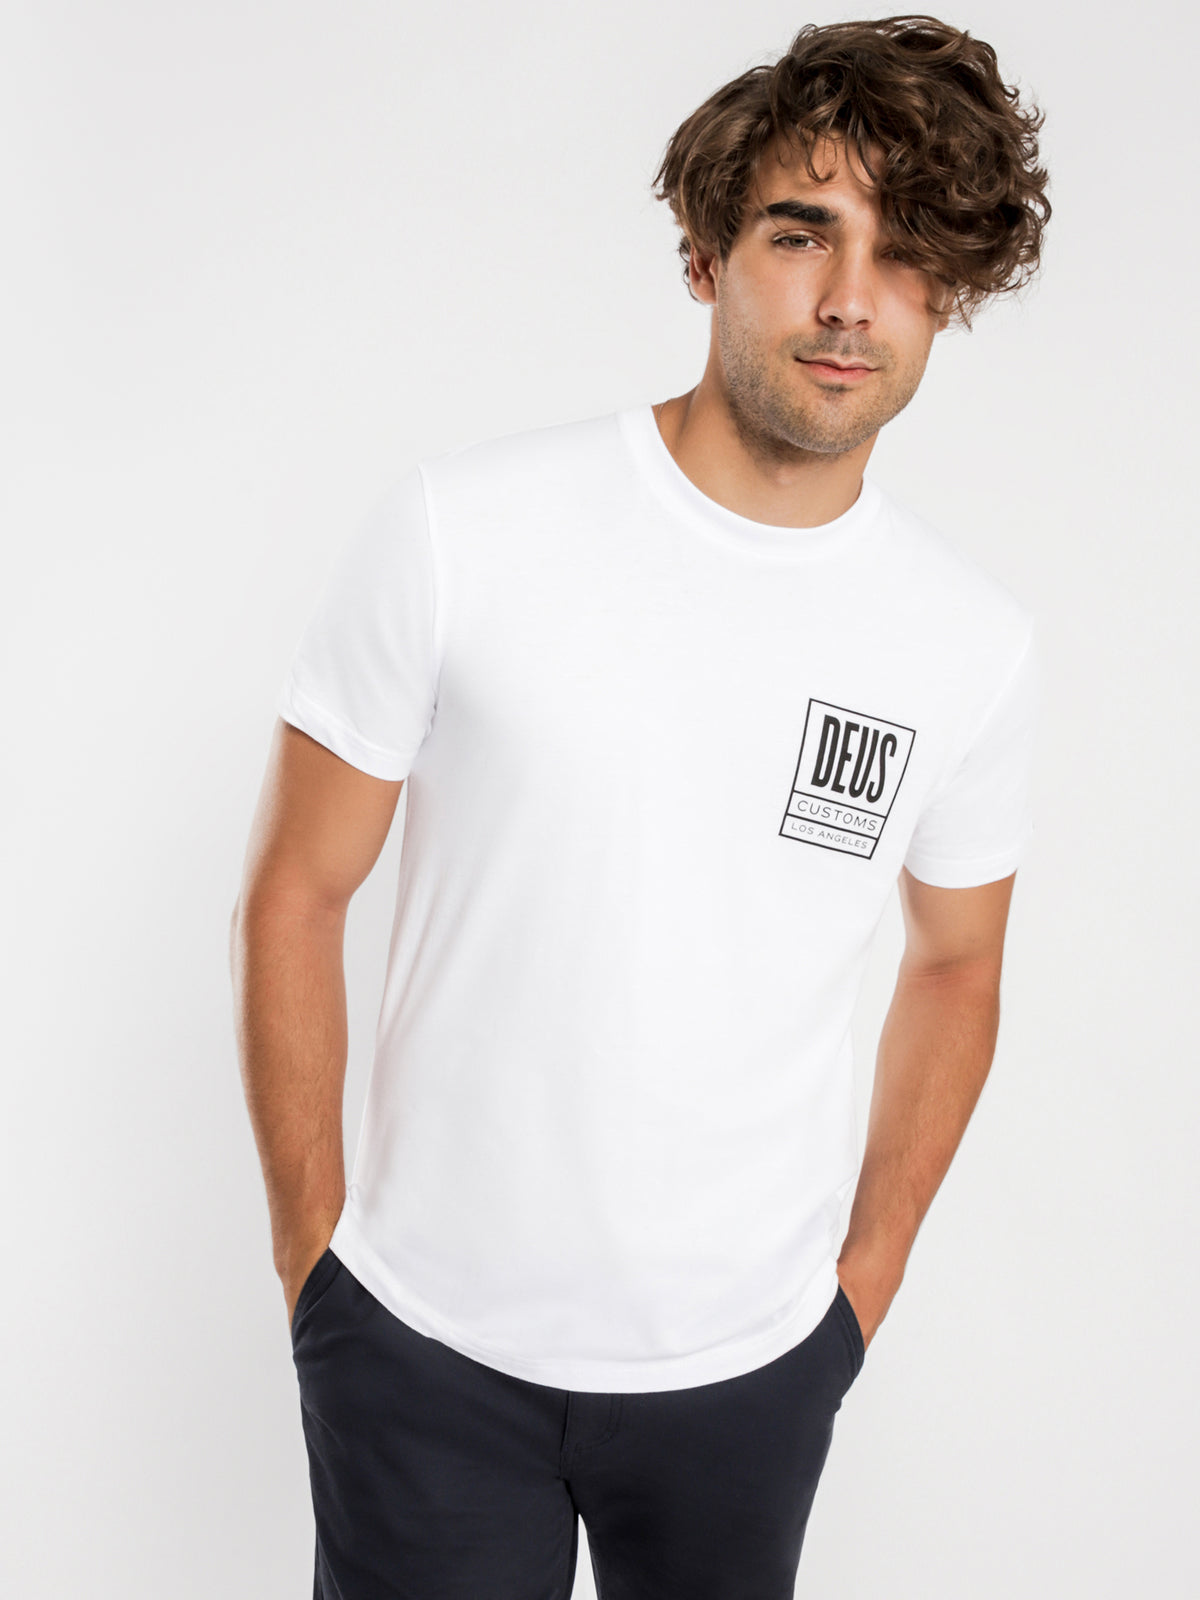 Deus Board and Cycle T-Shirt in White